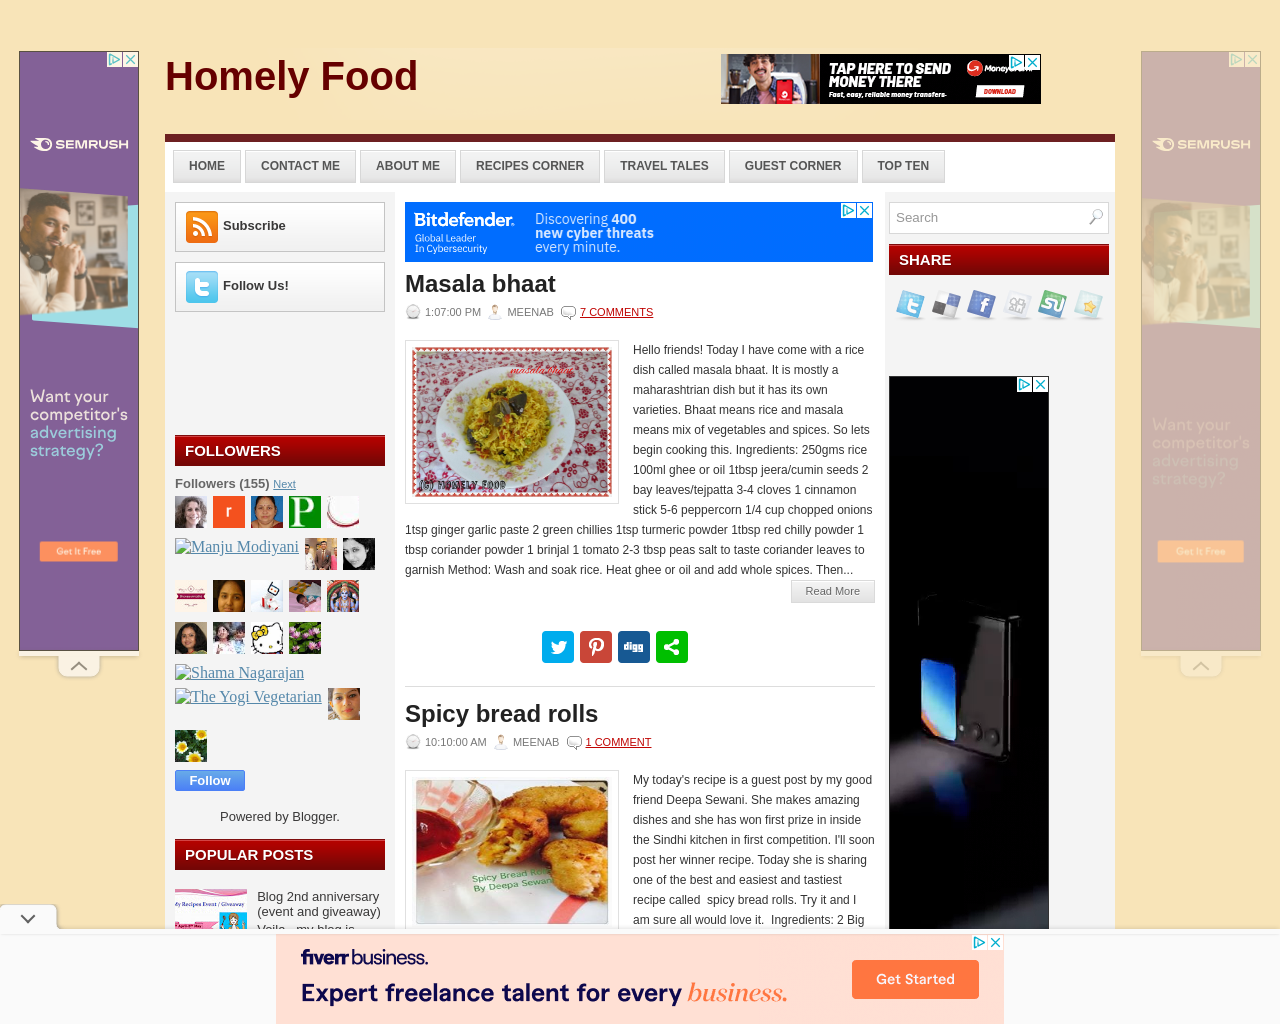 HOMELY FOOD